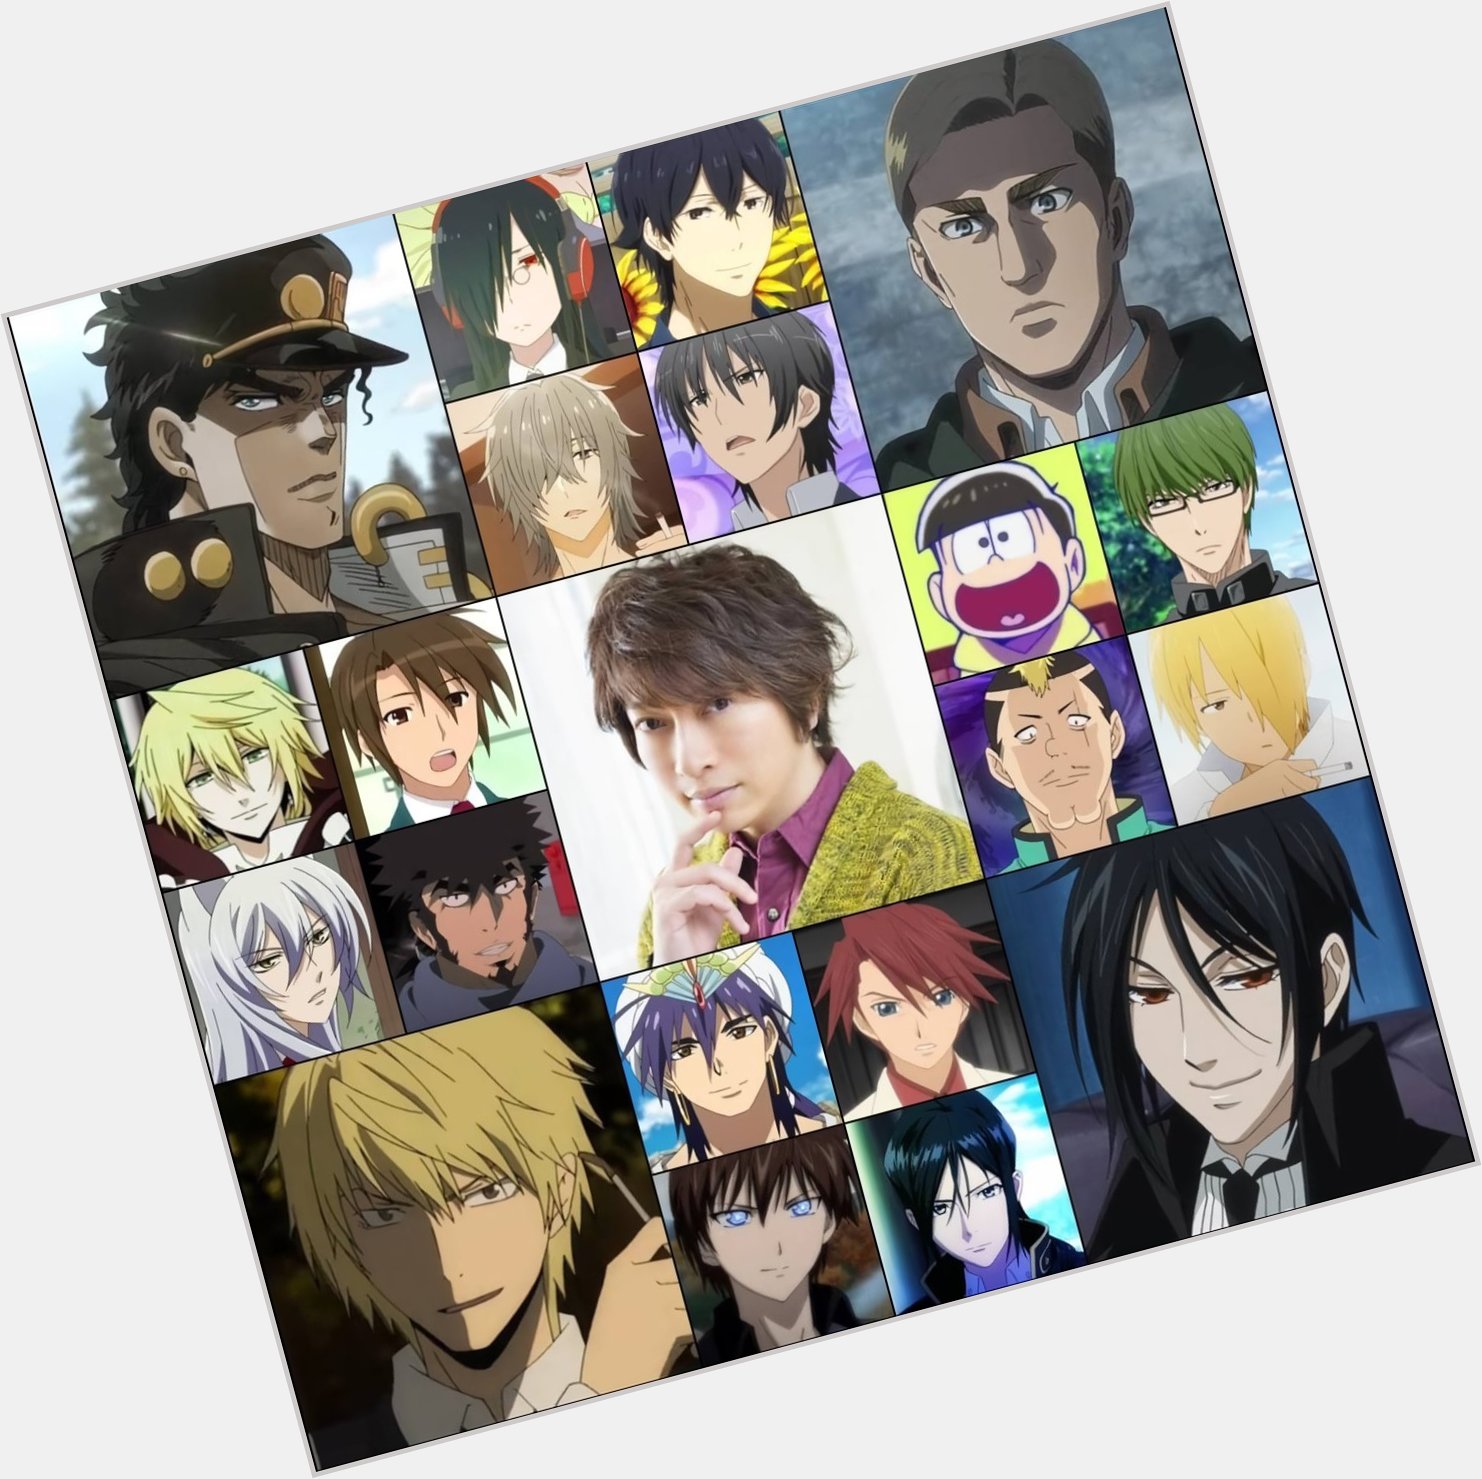 Happy 45th birthday to Daisuke Ono, we wish you all the best in your future! 